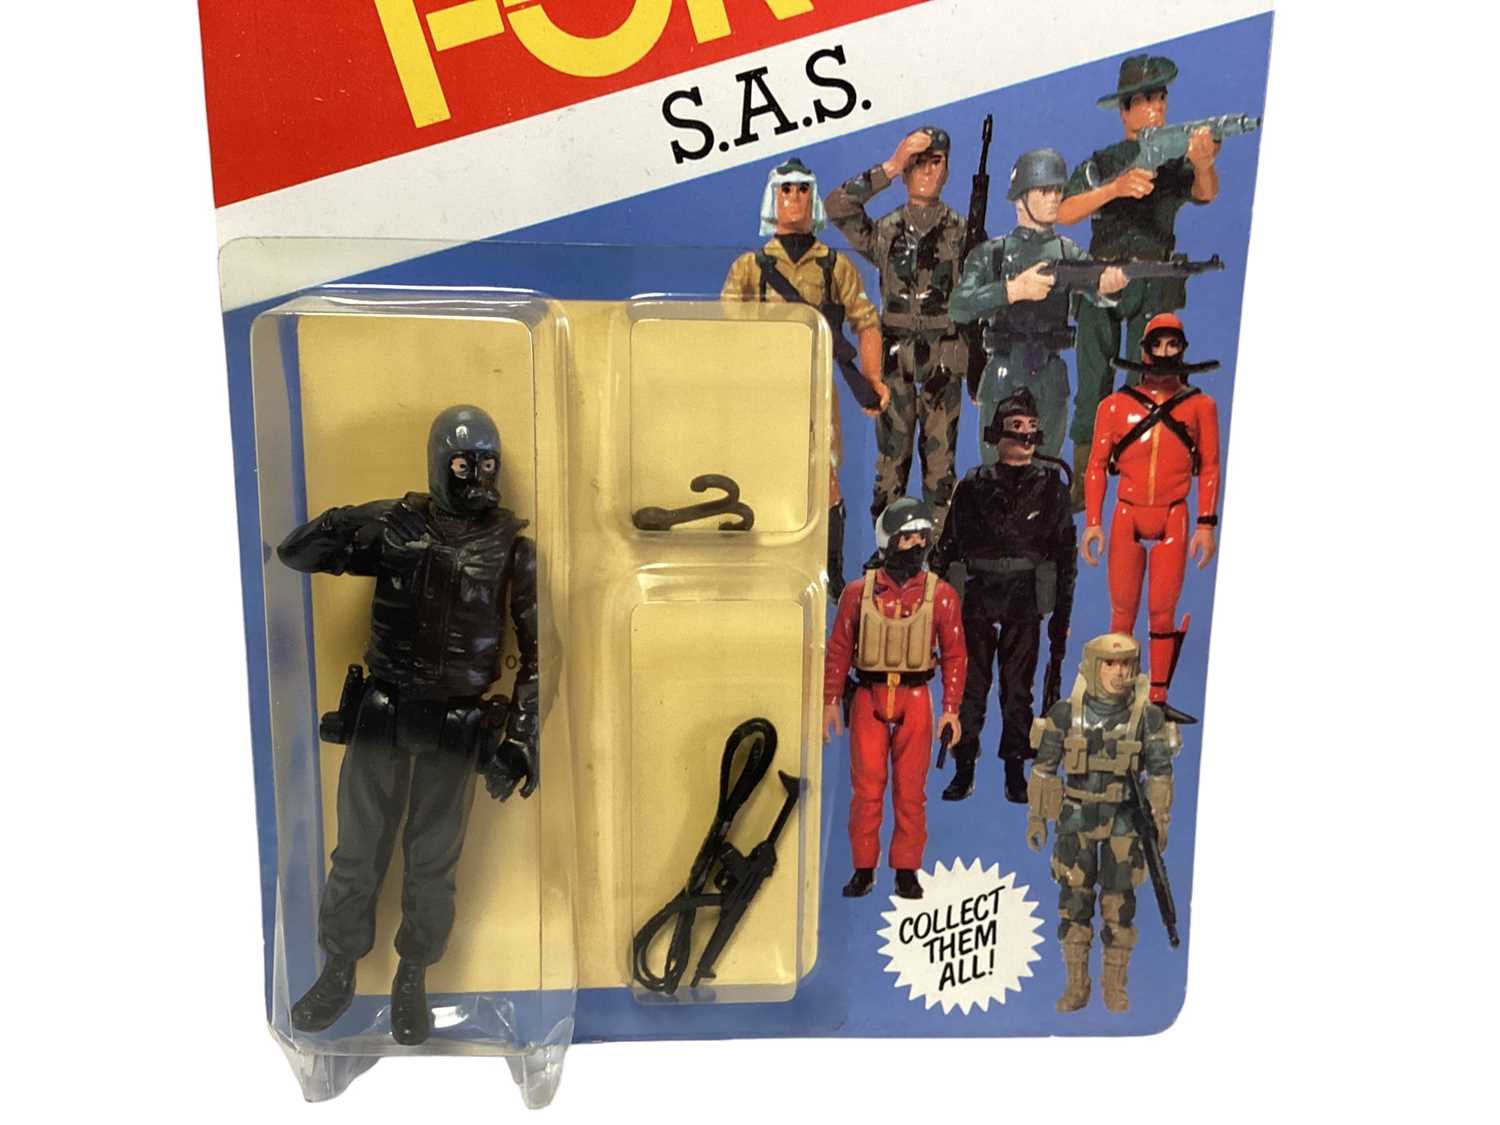 Palitoy Action Man Action Force Series 1 S.A.S, on card with blister pack (1) - Image 2 of 3